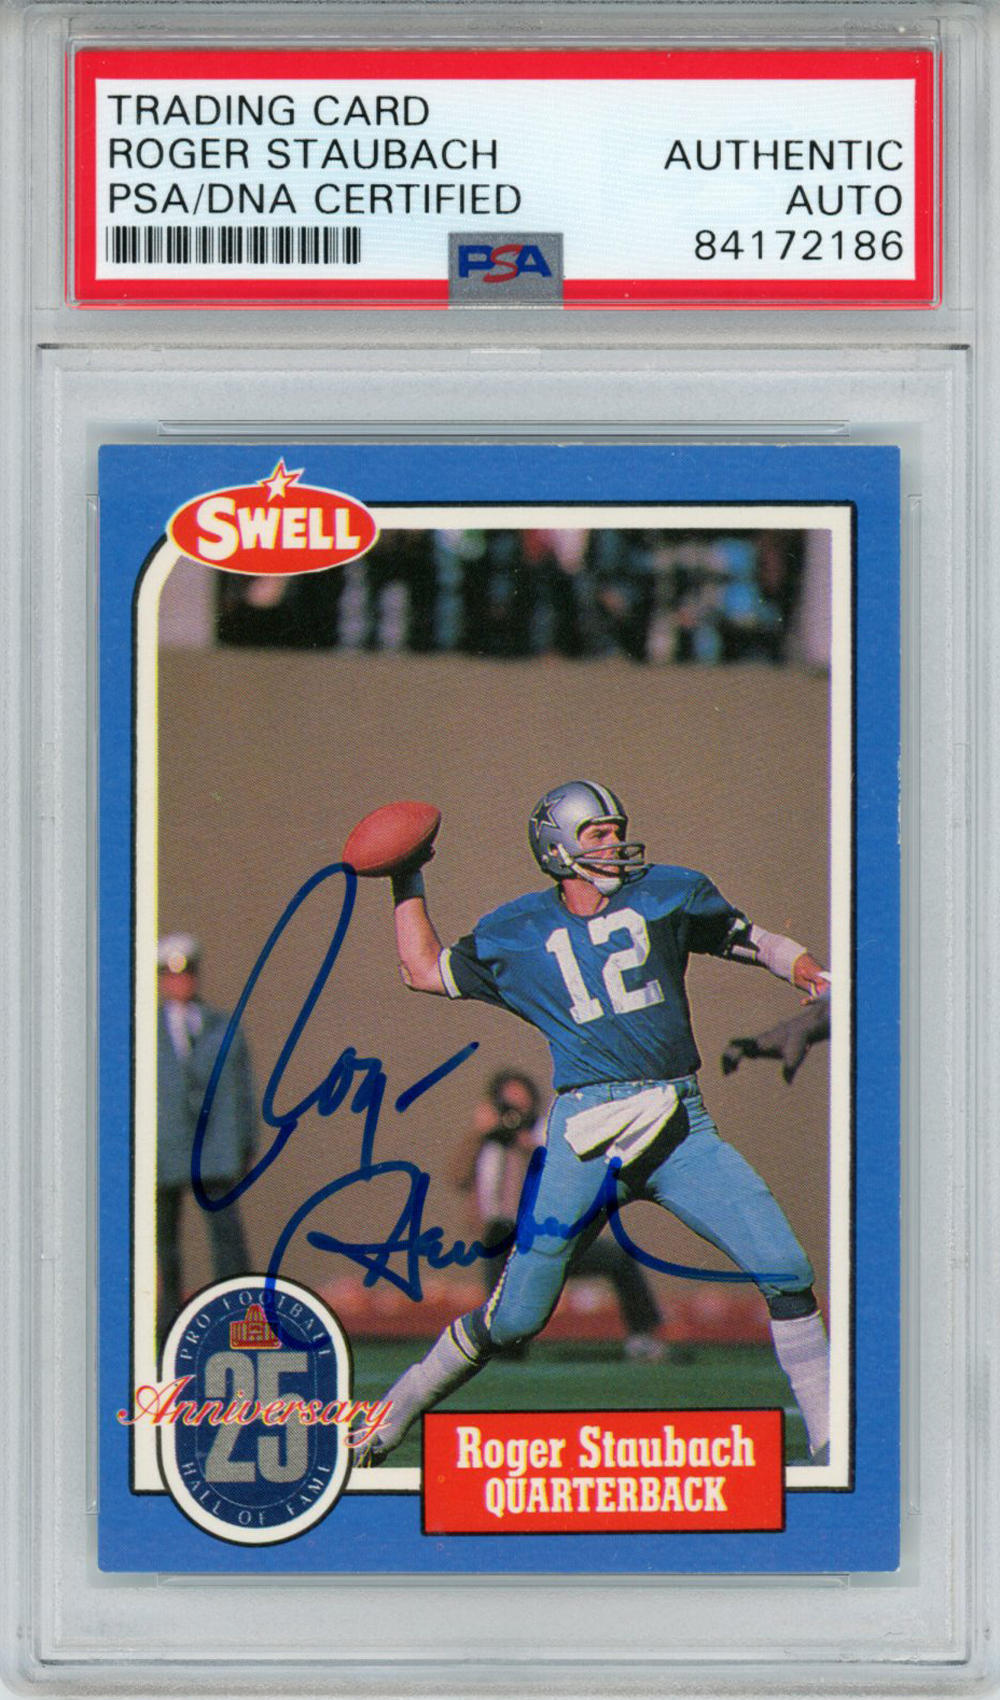 Roger Staubach Autographed/Signed 1988 Swell #5 Trading Card PSA Slab 32998